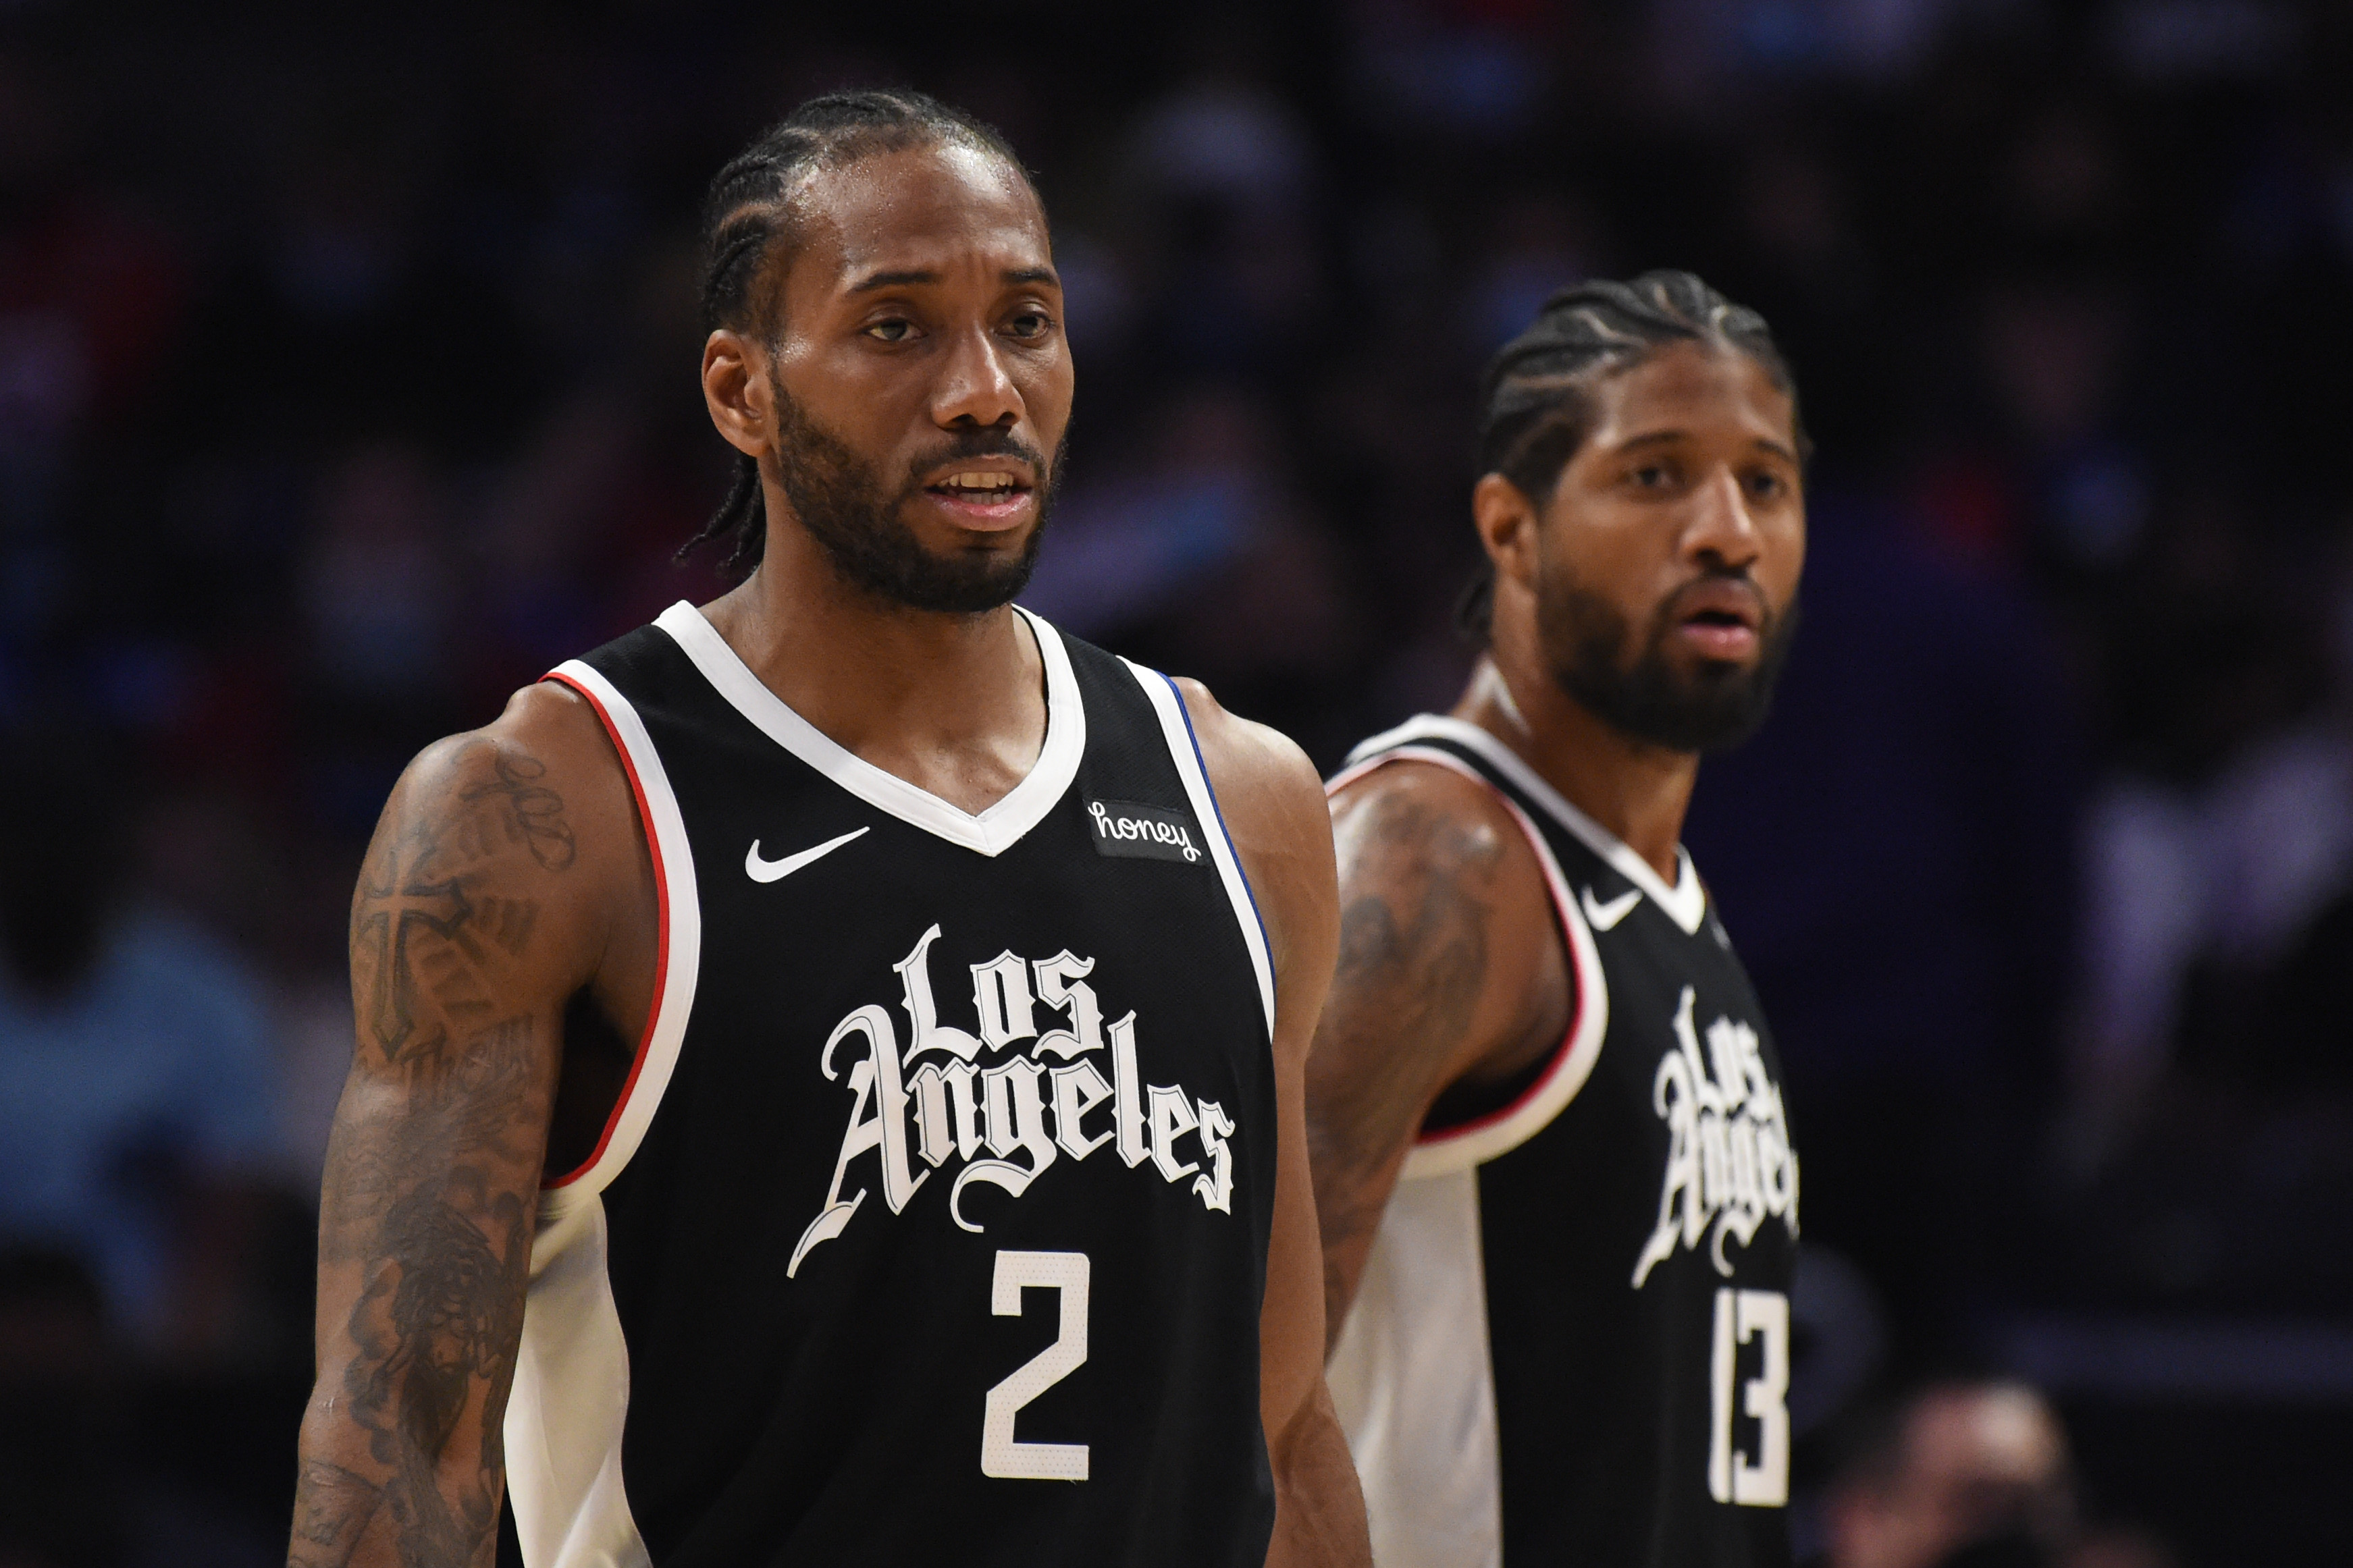 LOS ANGELES LAKERS ROSTER 2022-2023 (UNOFFFICIAL) PROSPECTED LINEUP FOR  LAKERS 